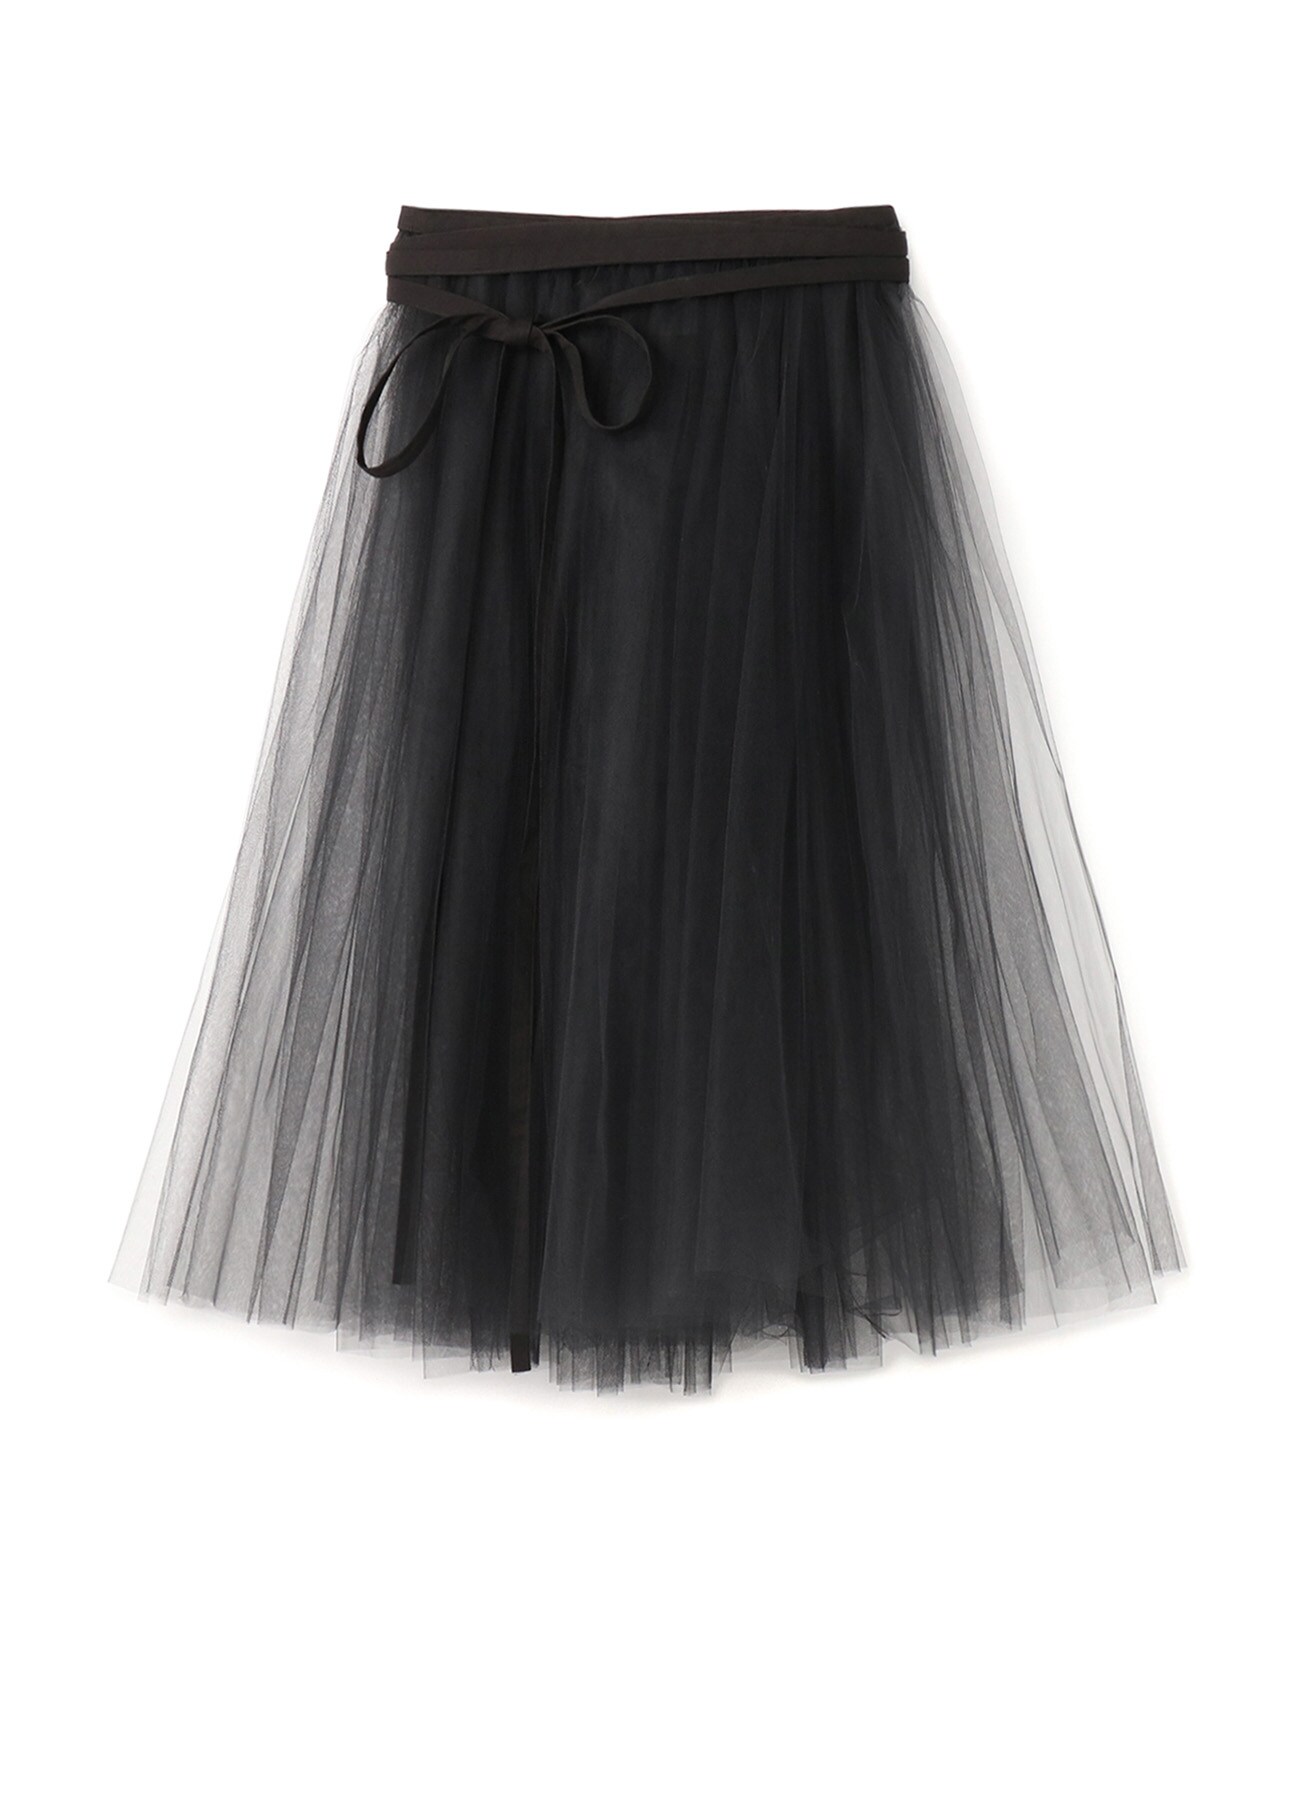 [LIMI feu 20th Anniv. Collection]Ny/Tulle Wrap Skirt(S Black